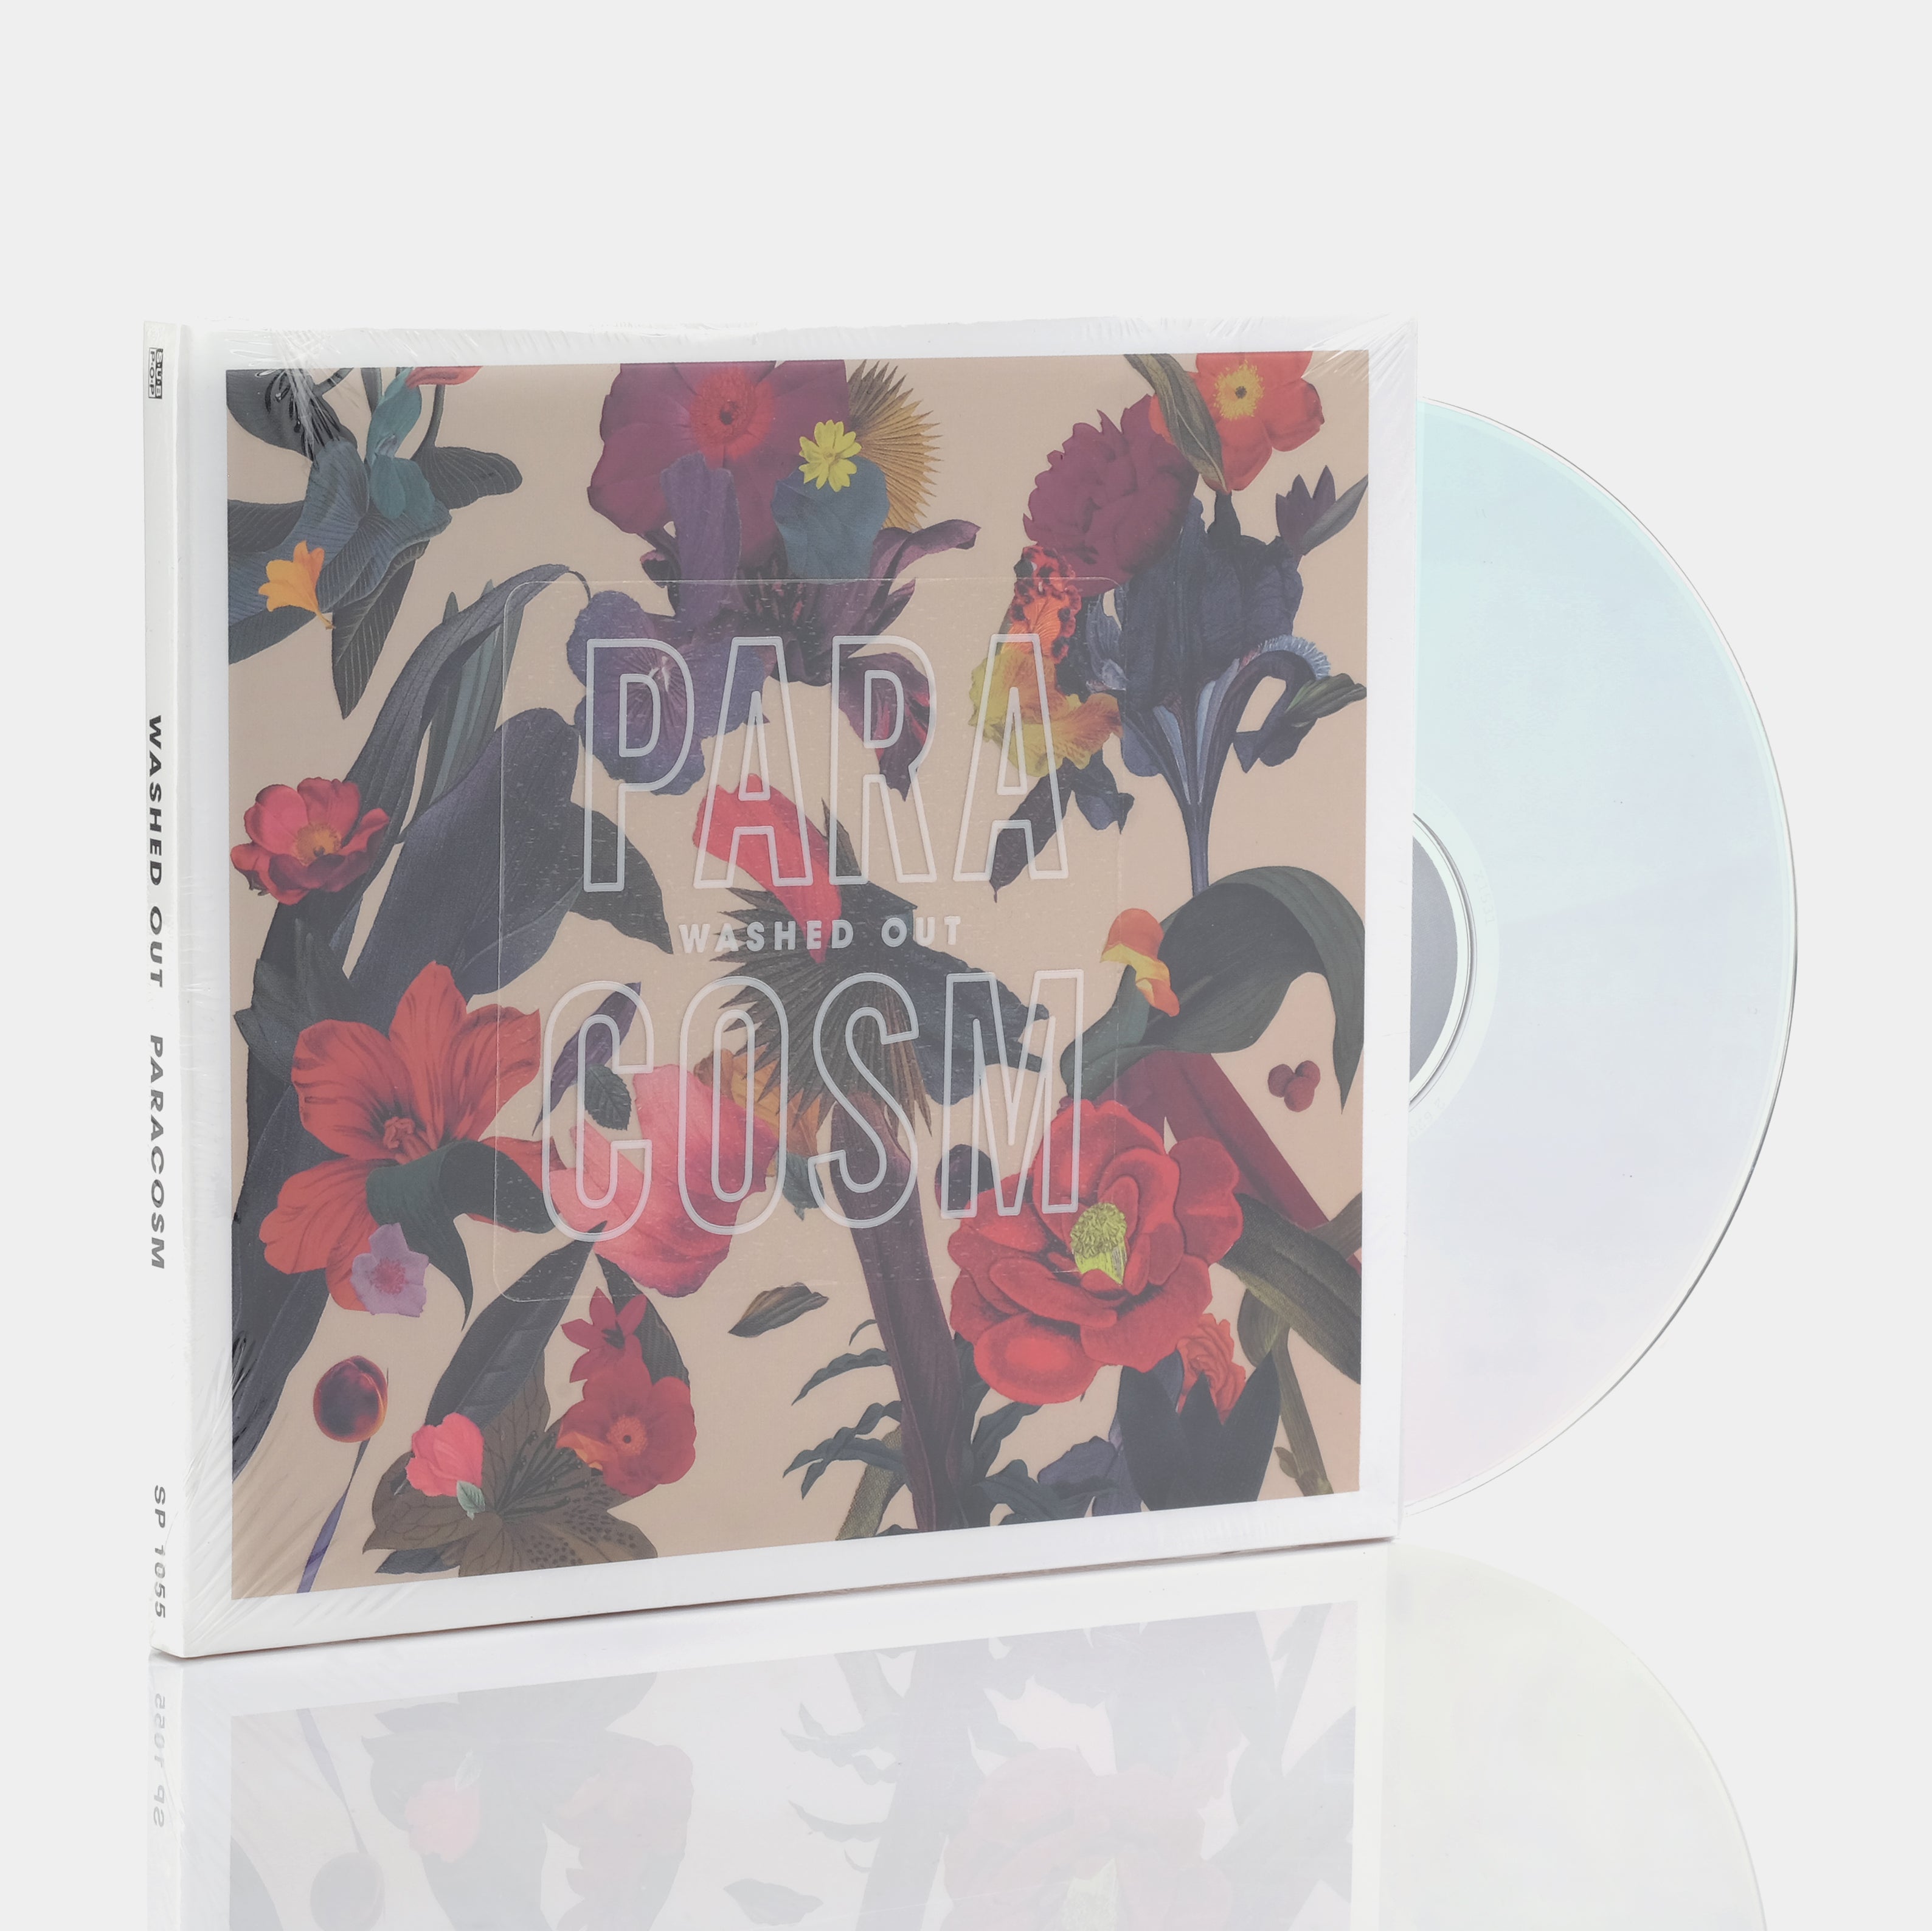 Washed Out - Paracosm CD